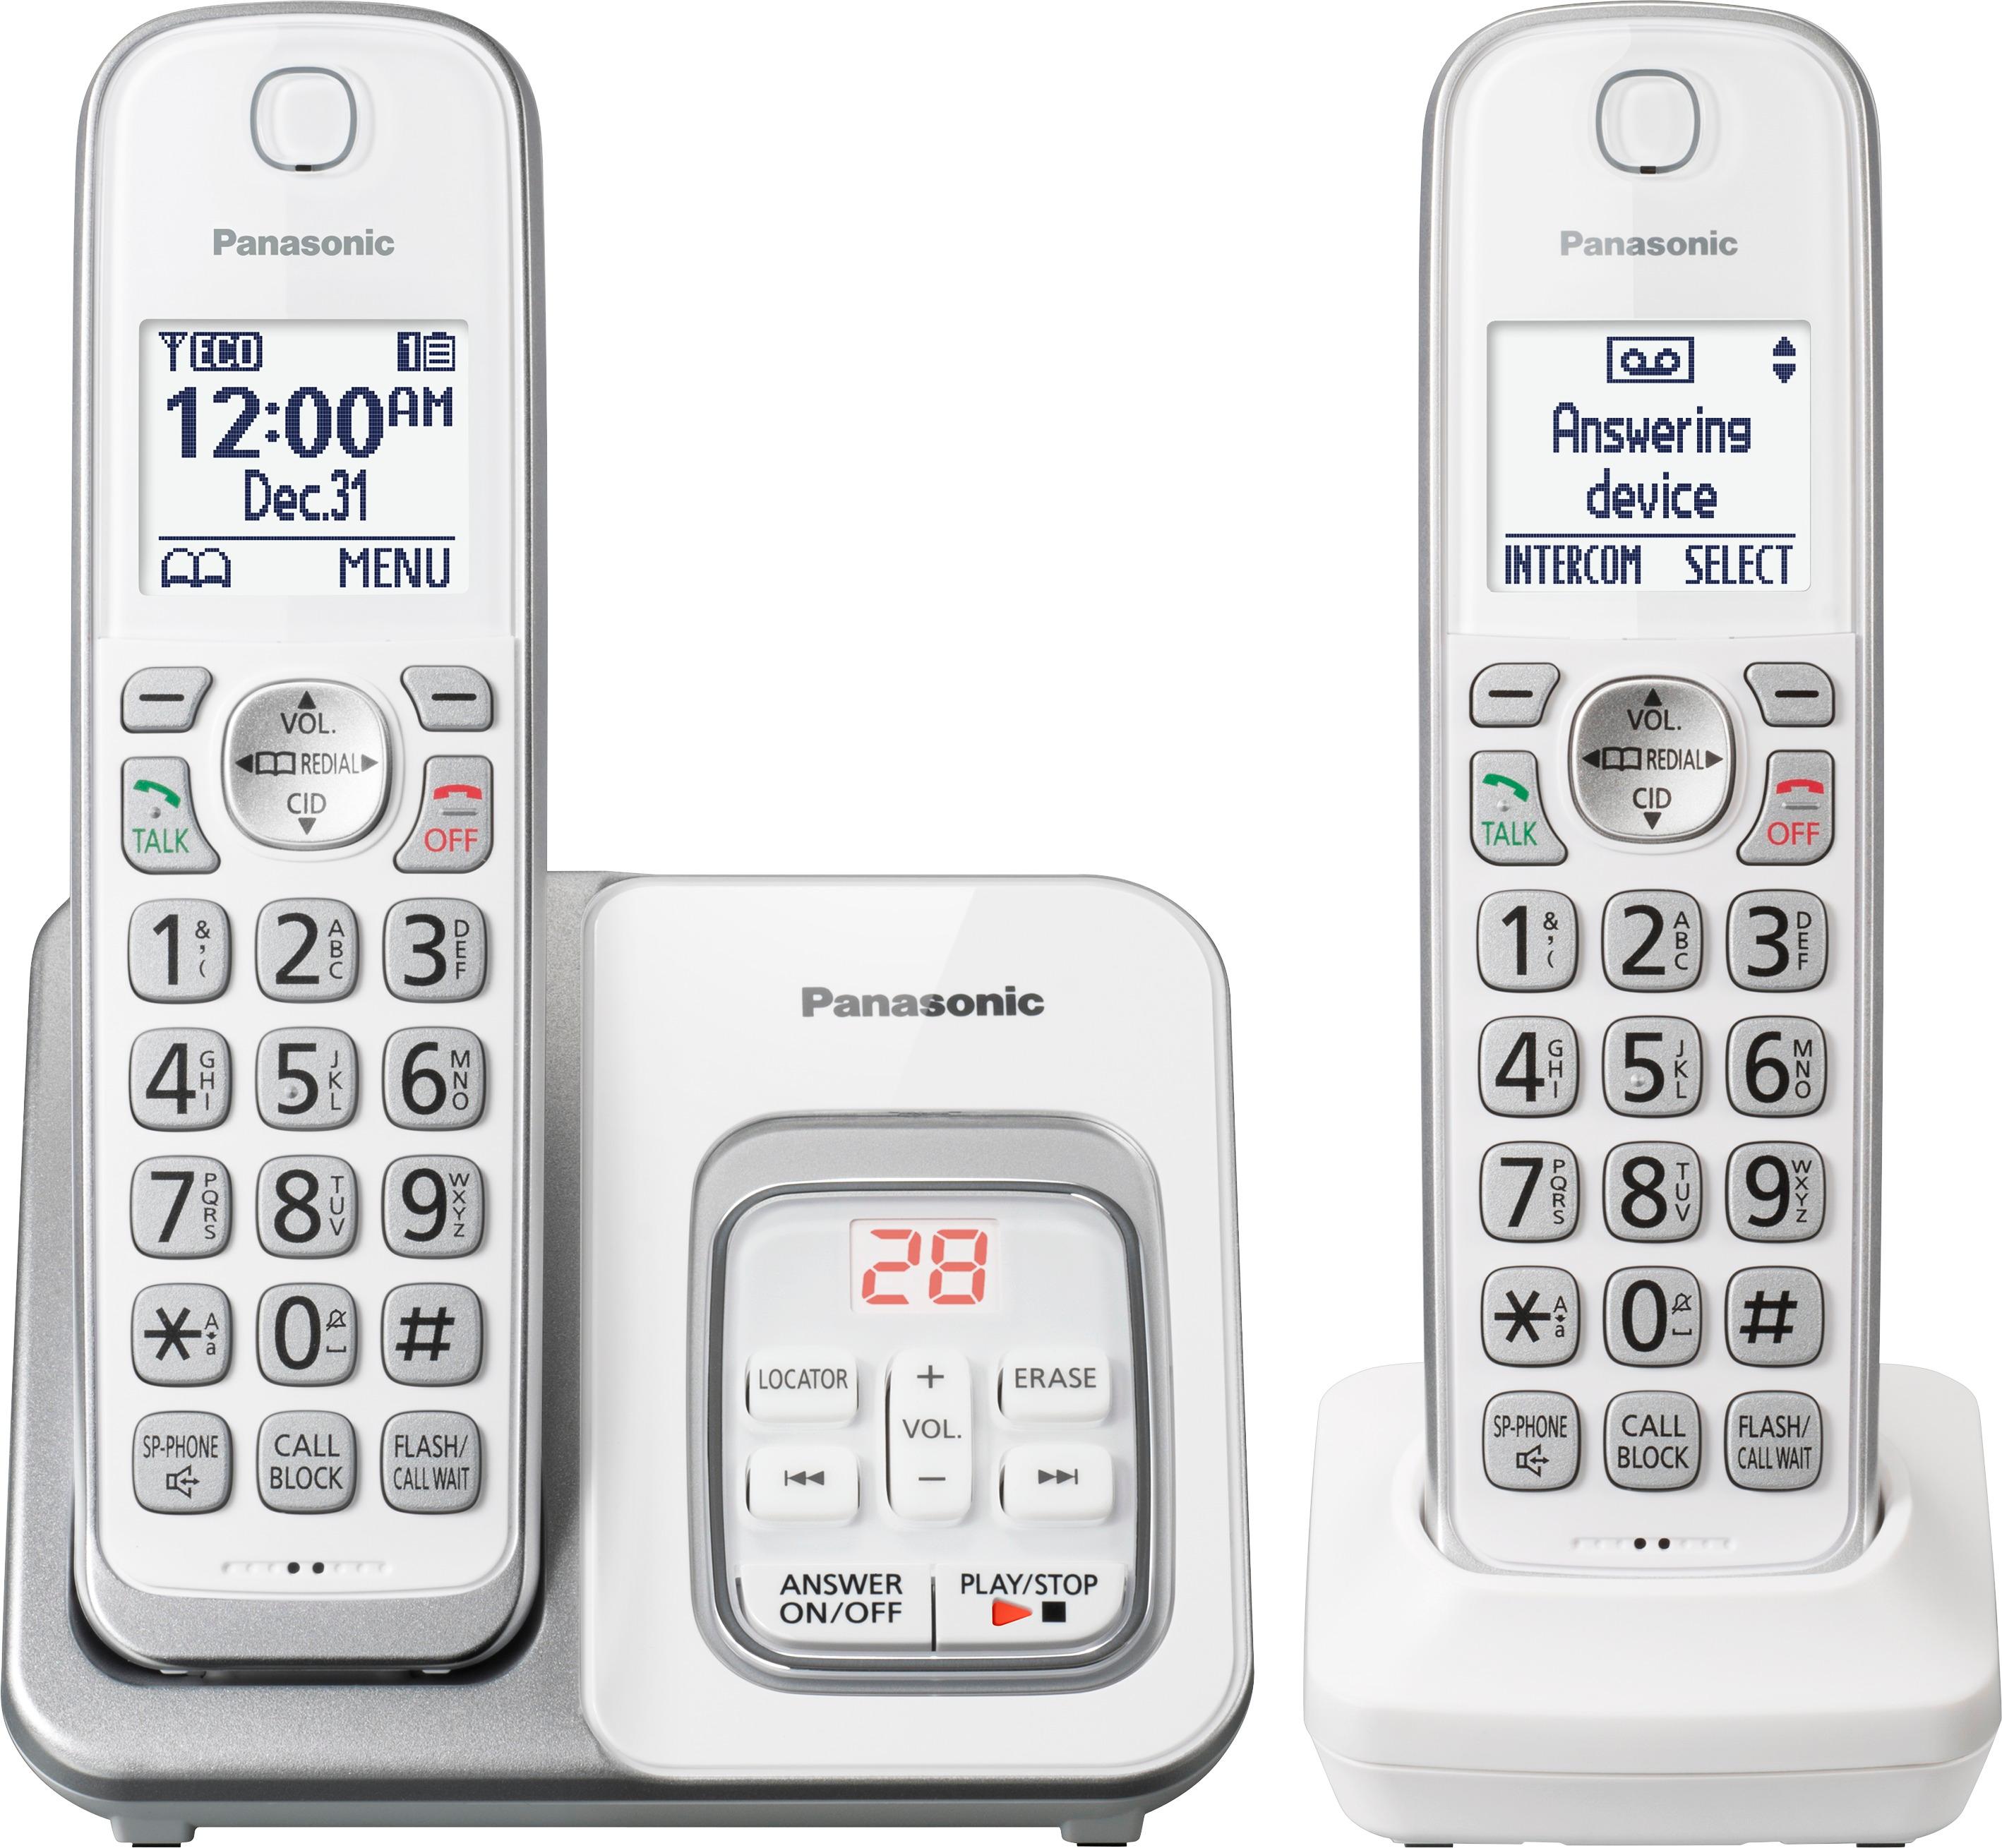 Panasonic - KX-TGD532W DECT 6.0 Expandable Cordless Phone System with Digital Answering System - White was $59.99 now $39.99 (33.0% off)